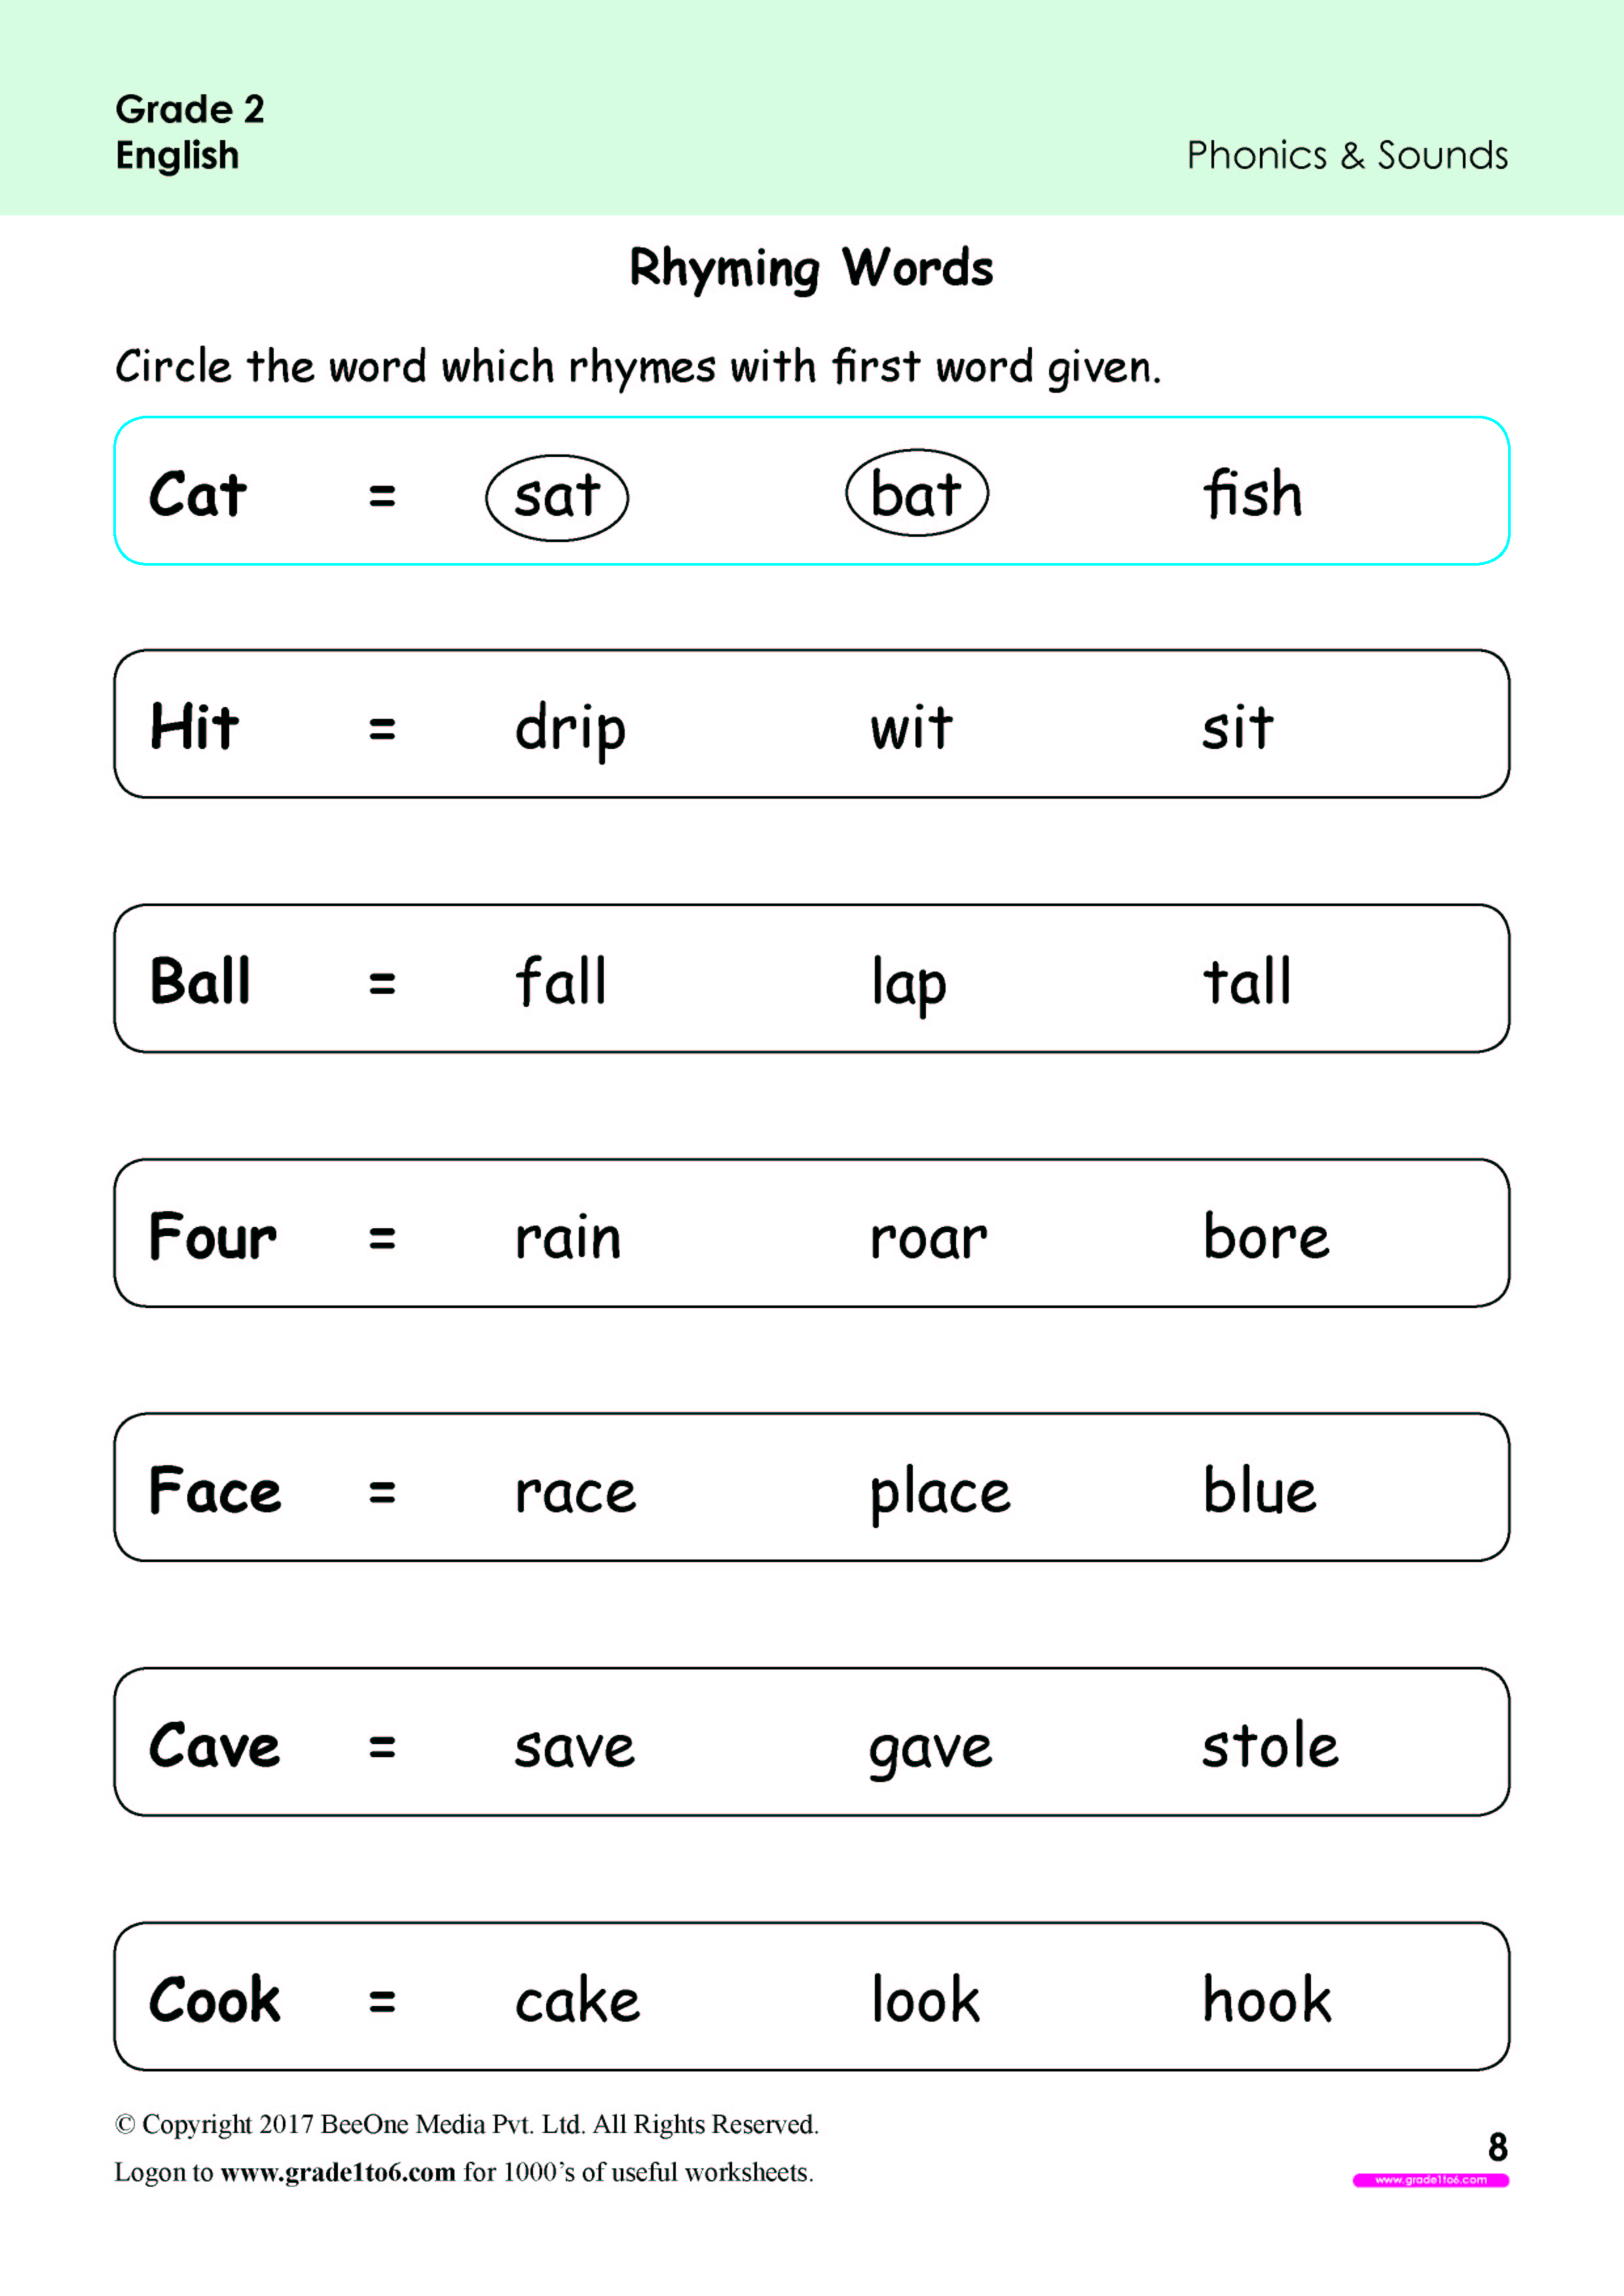 rhyming-words-worksheets-for-grade-2-www-grade1to6